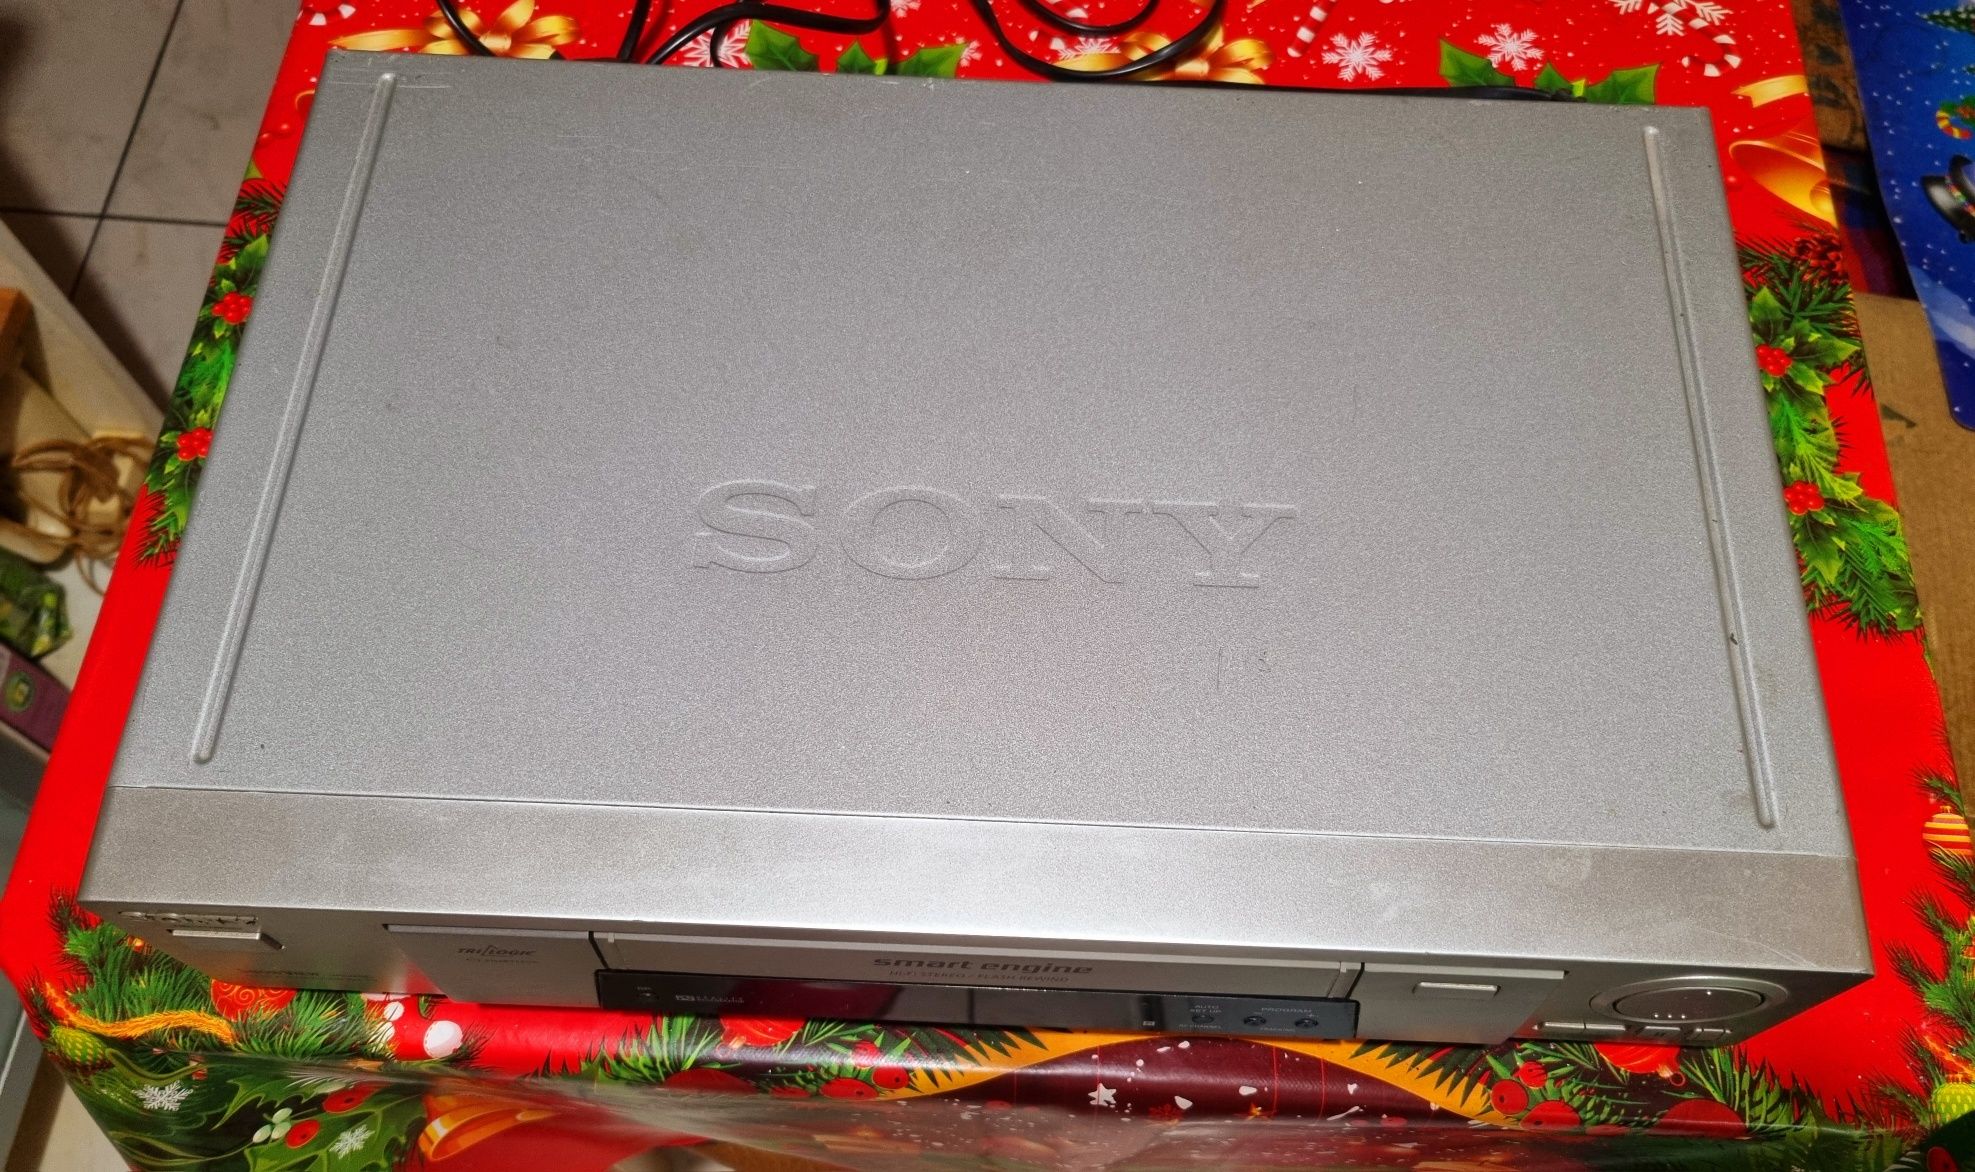 VHS recorder / player Sony in stare perfecta